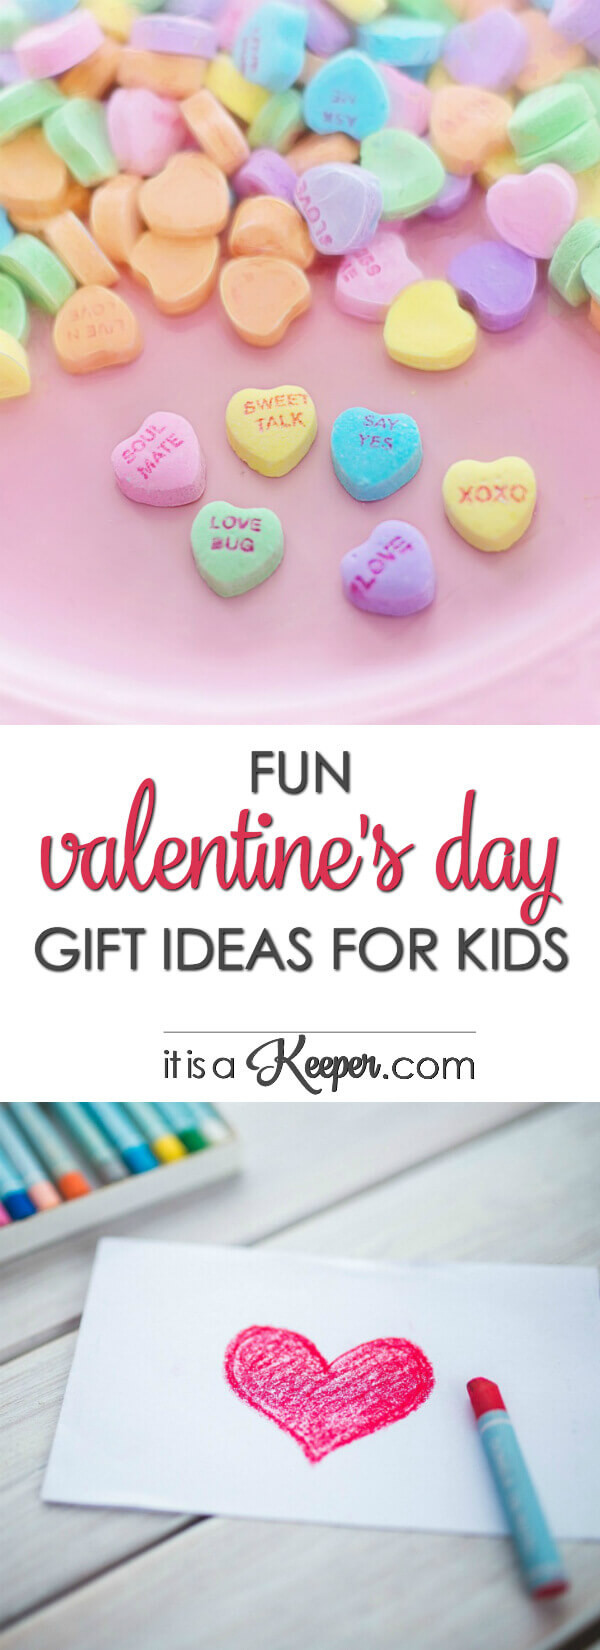 Gift Ideas For Kids For Valentines Day
 Fun Valentine s Day Gift Ideas for Kids